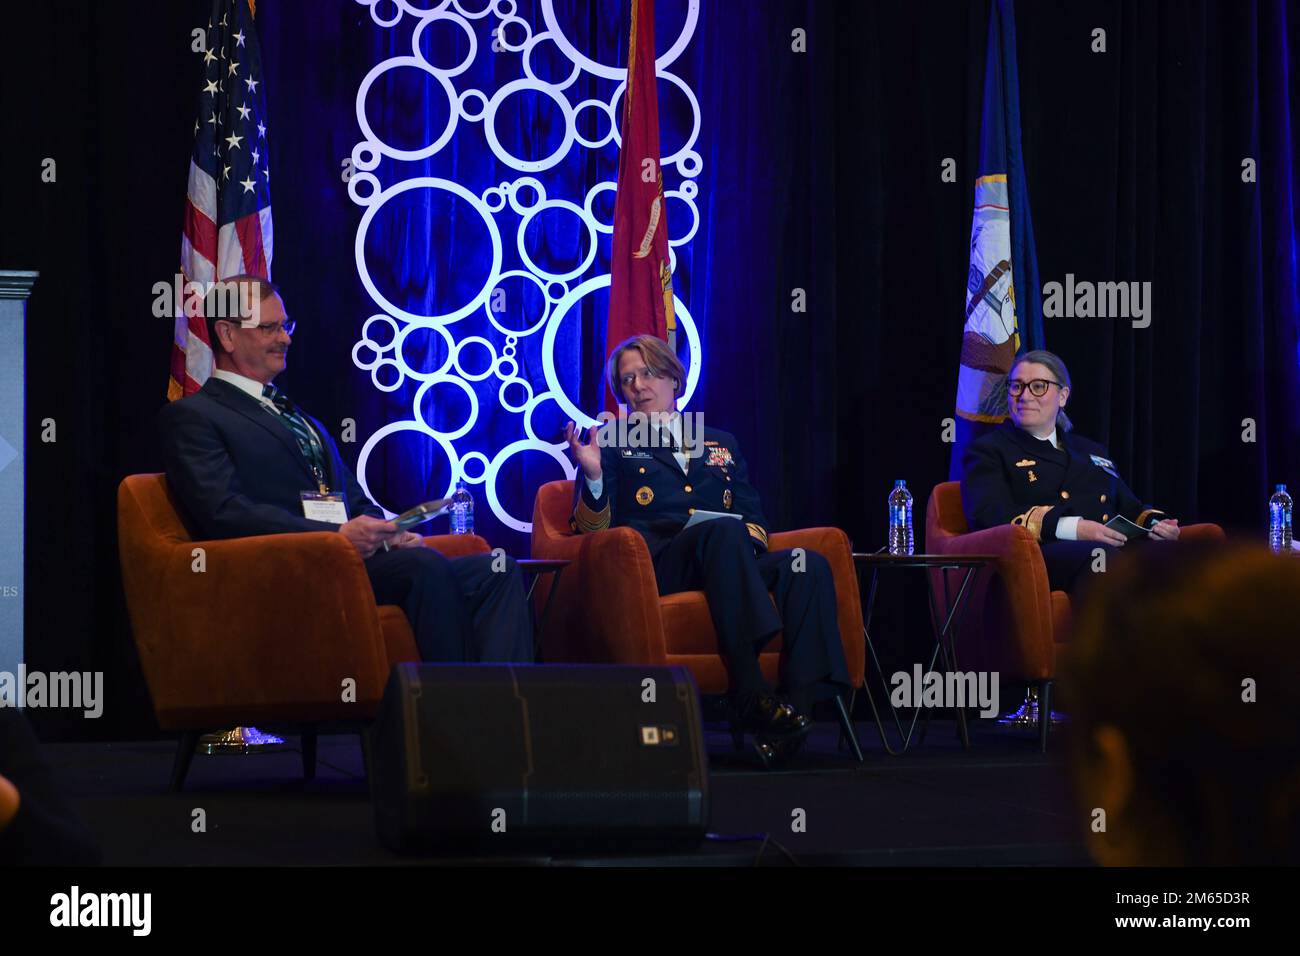 NATIONAL HARBOR, Md. (April 4, 2022) Adm. Linda Fagan, Vice Commandant, U.S. Coast Guard, talks about safeguarding international law in the Arctic with  Major General Randy Kee, U.S. Department of Defense Senior Advisor of Arctic Security Affairs, (left), and Rear Adm. Ewa Skoog Haslum, Chief of Navy, Swedish Navy, (right), at “The Geostrategic Importance of the Arctic” panel during the Sea-Air-Space Exposition. The Sea-Air-Space Exposition is an annual event that brings together key military decision makers, the U.S. defense industrial base and private-sector U.S. companies for an innovative Stock Photo